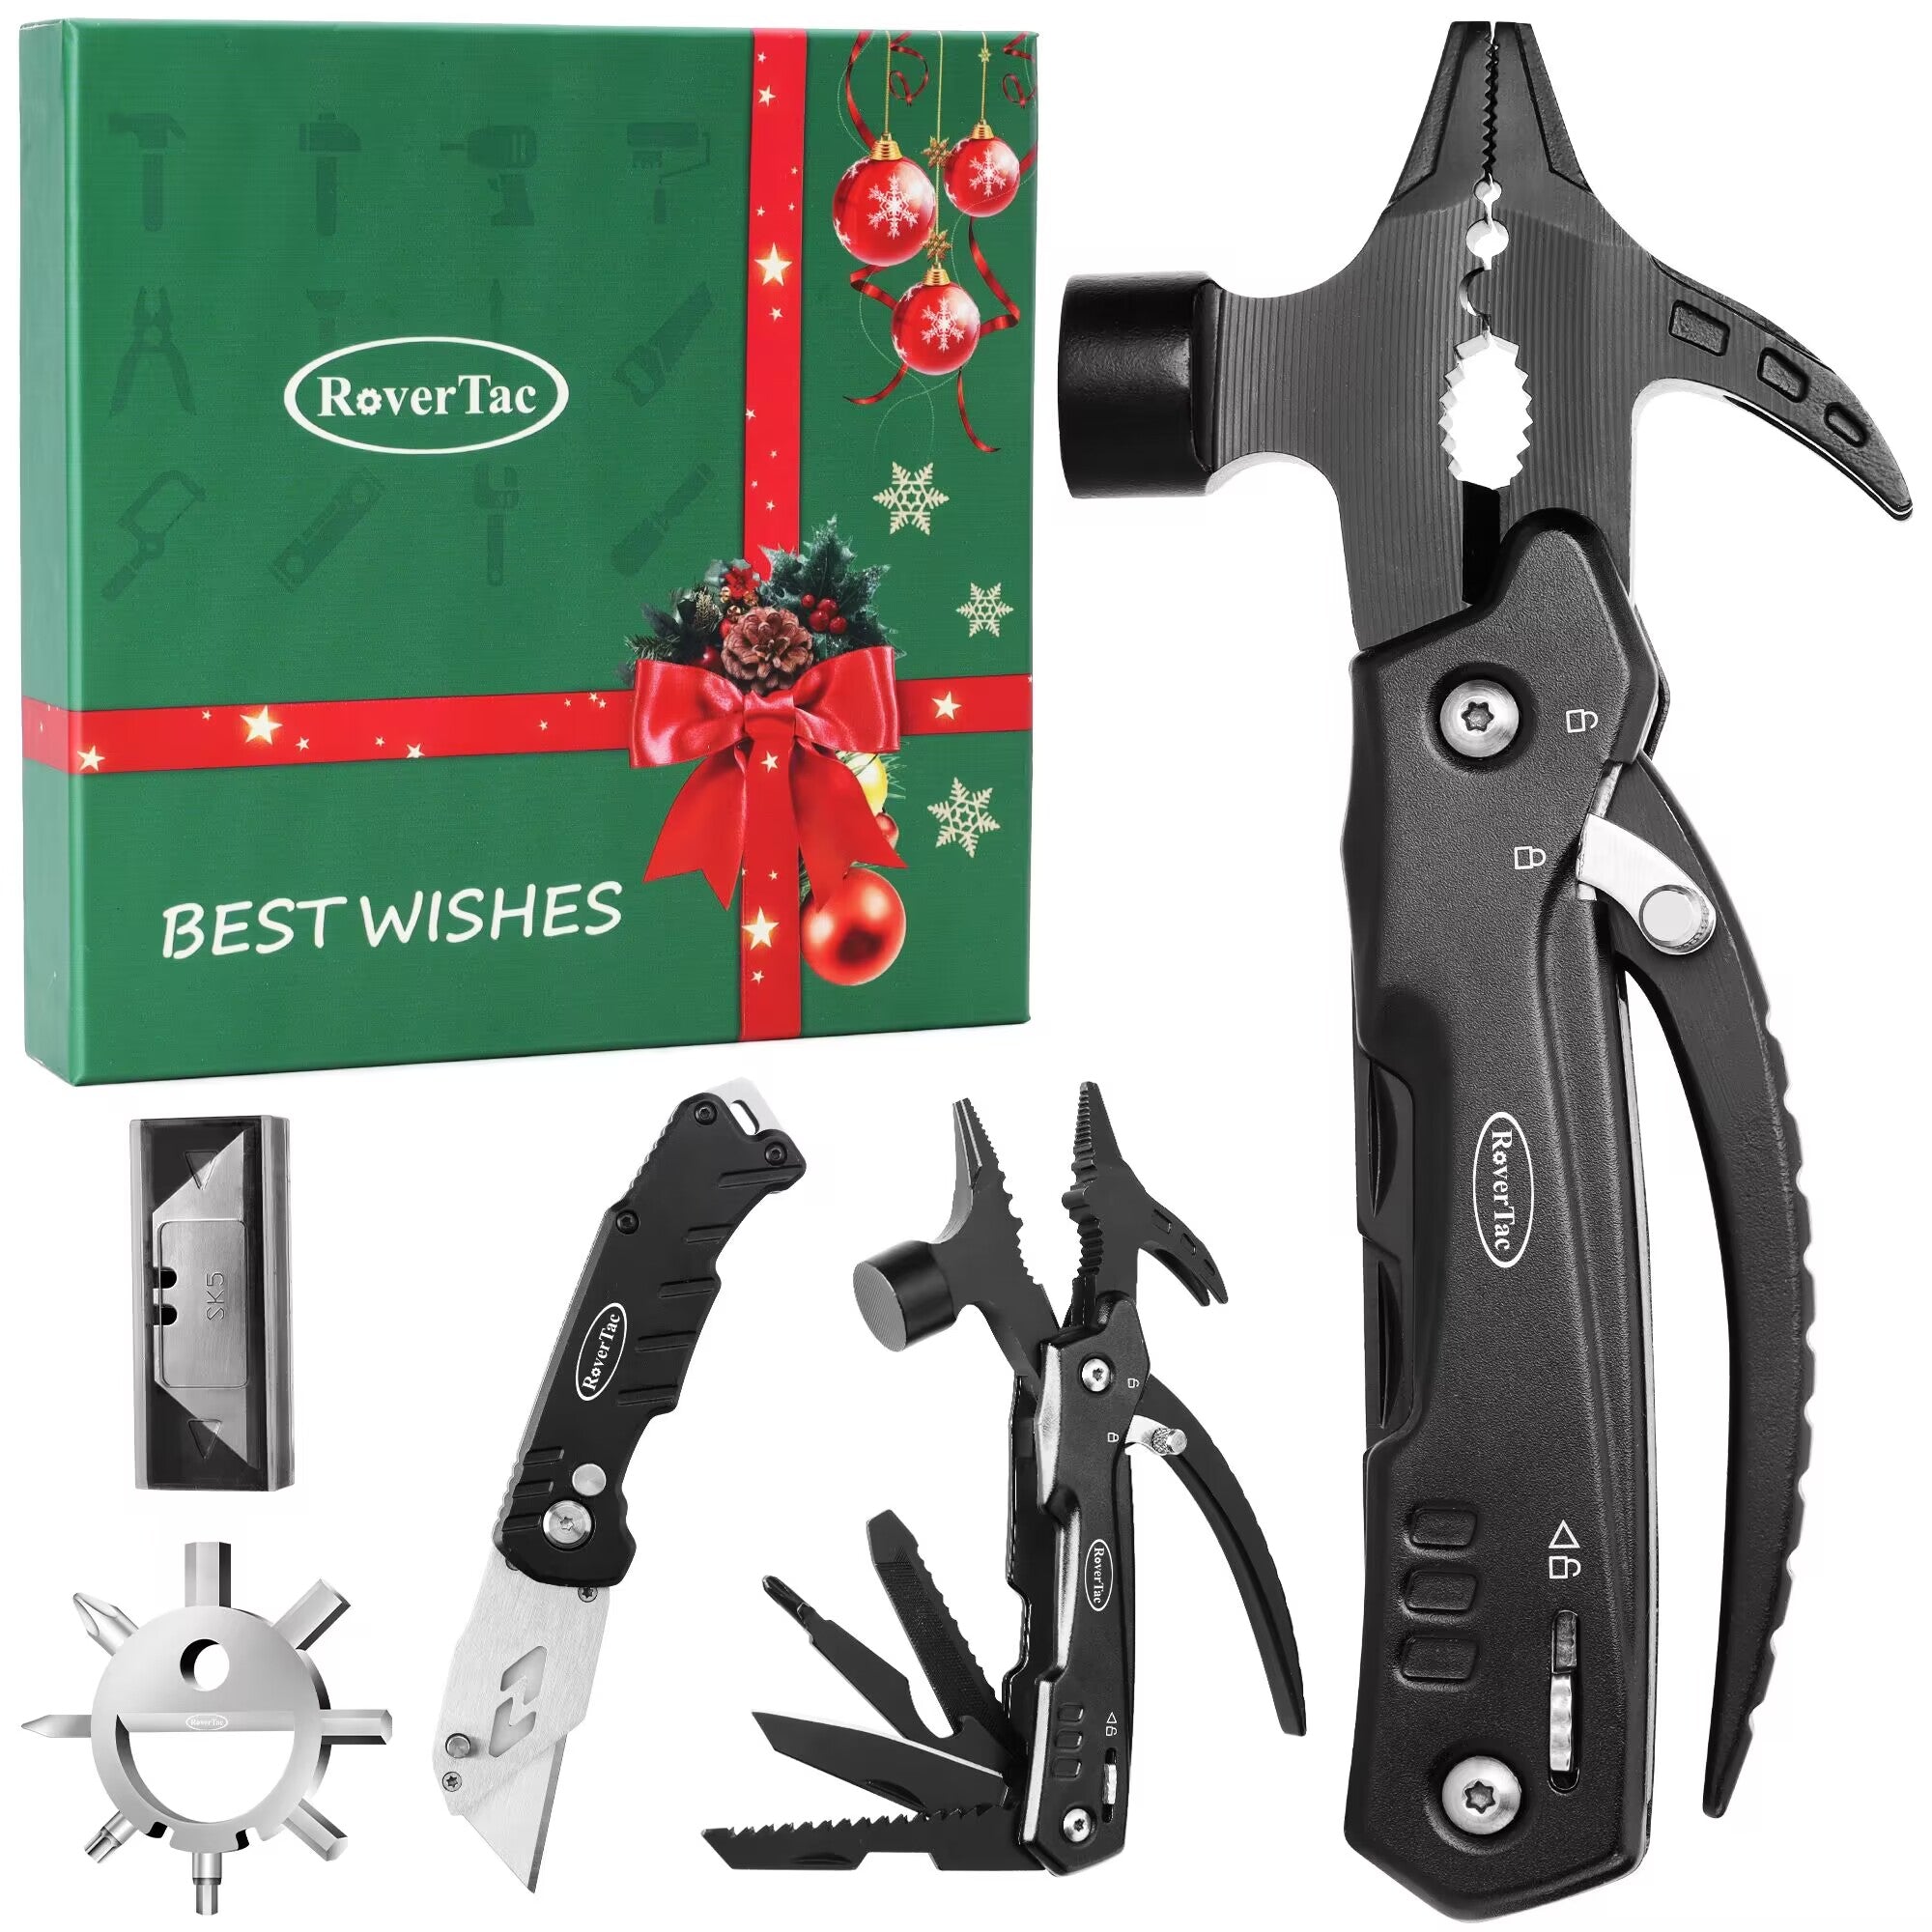 RoverTac Tool Set for Mens Gifts, Christmas Gifts for Men Women